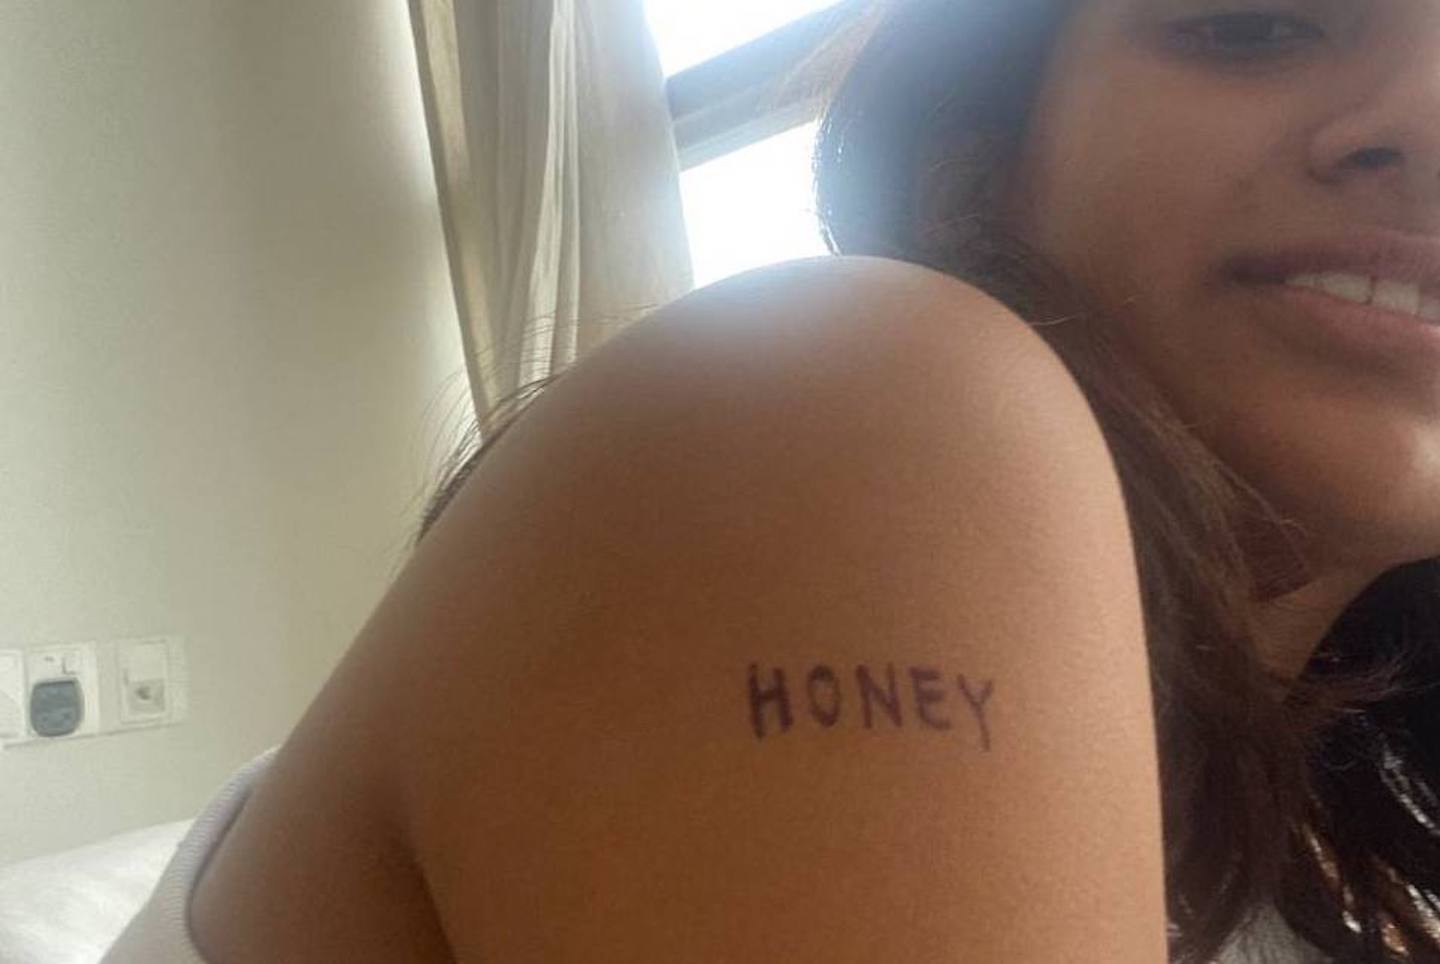 How to Make a DIY Temporary Tattoo Using a Pen and Toothpaste